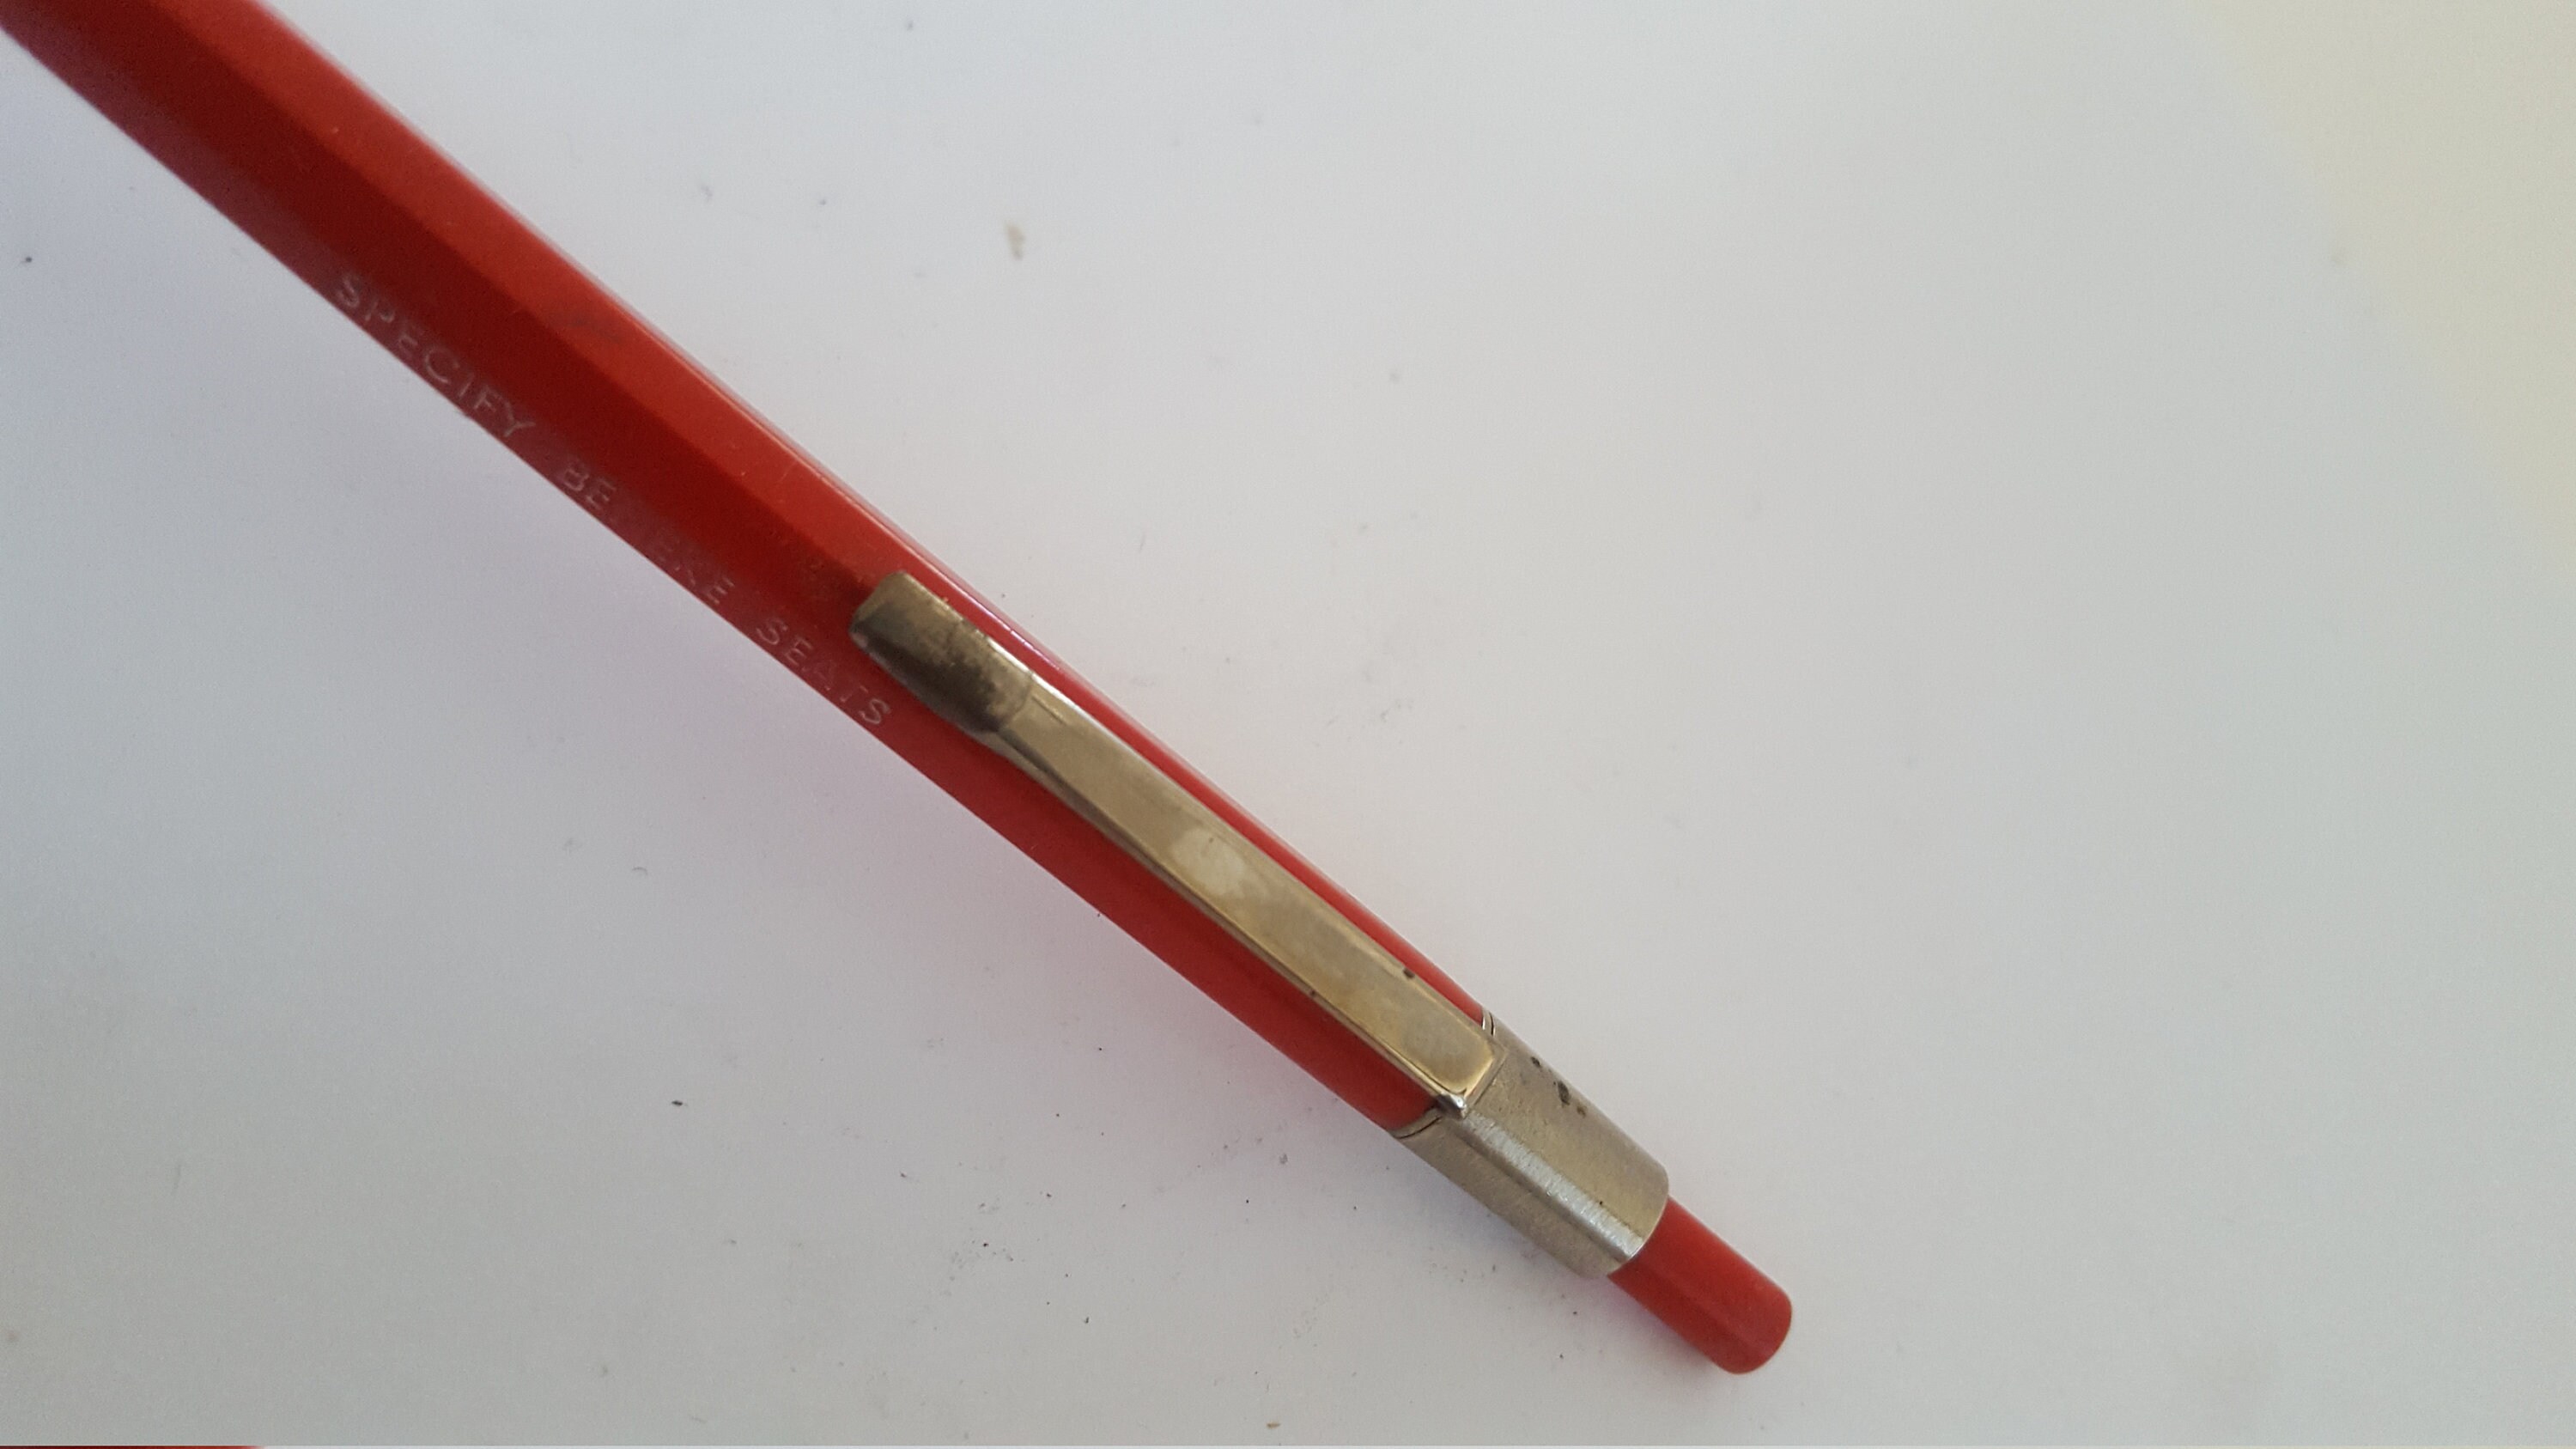 A.W. Faber Castell, Locktite Mechanical Pencil, Kleenzit Drawing Cleaner,  Drafting Drawing Pencil, Vintage Drafting Supplies 